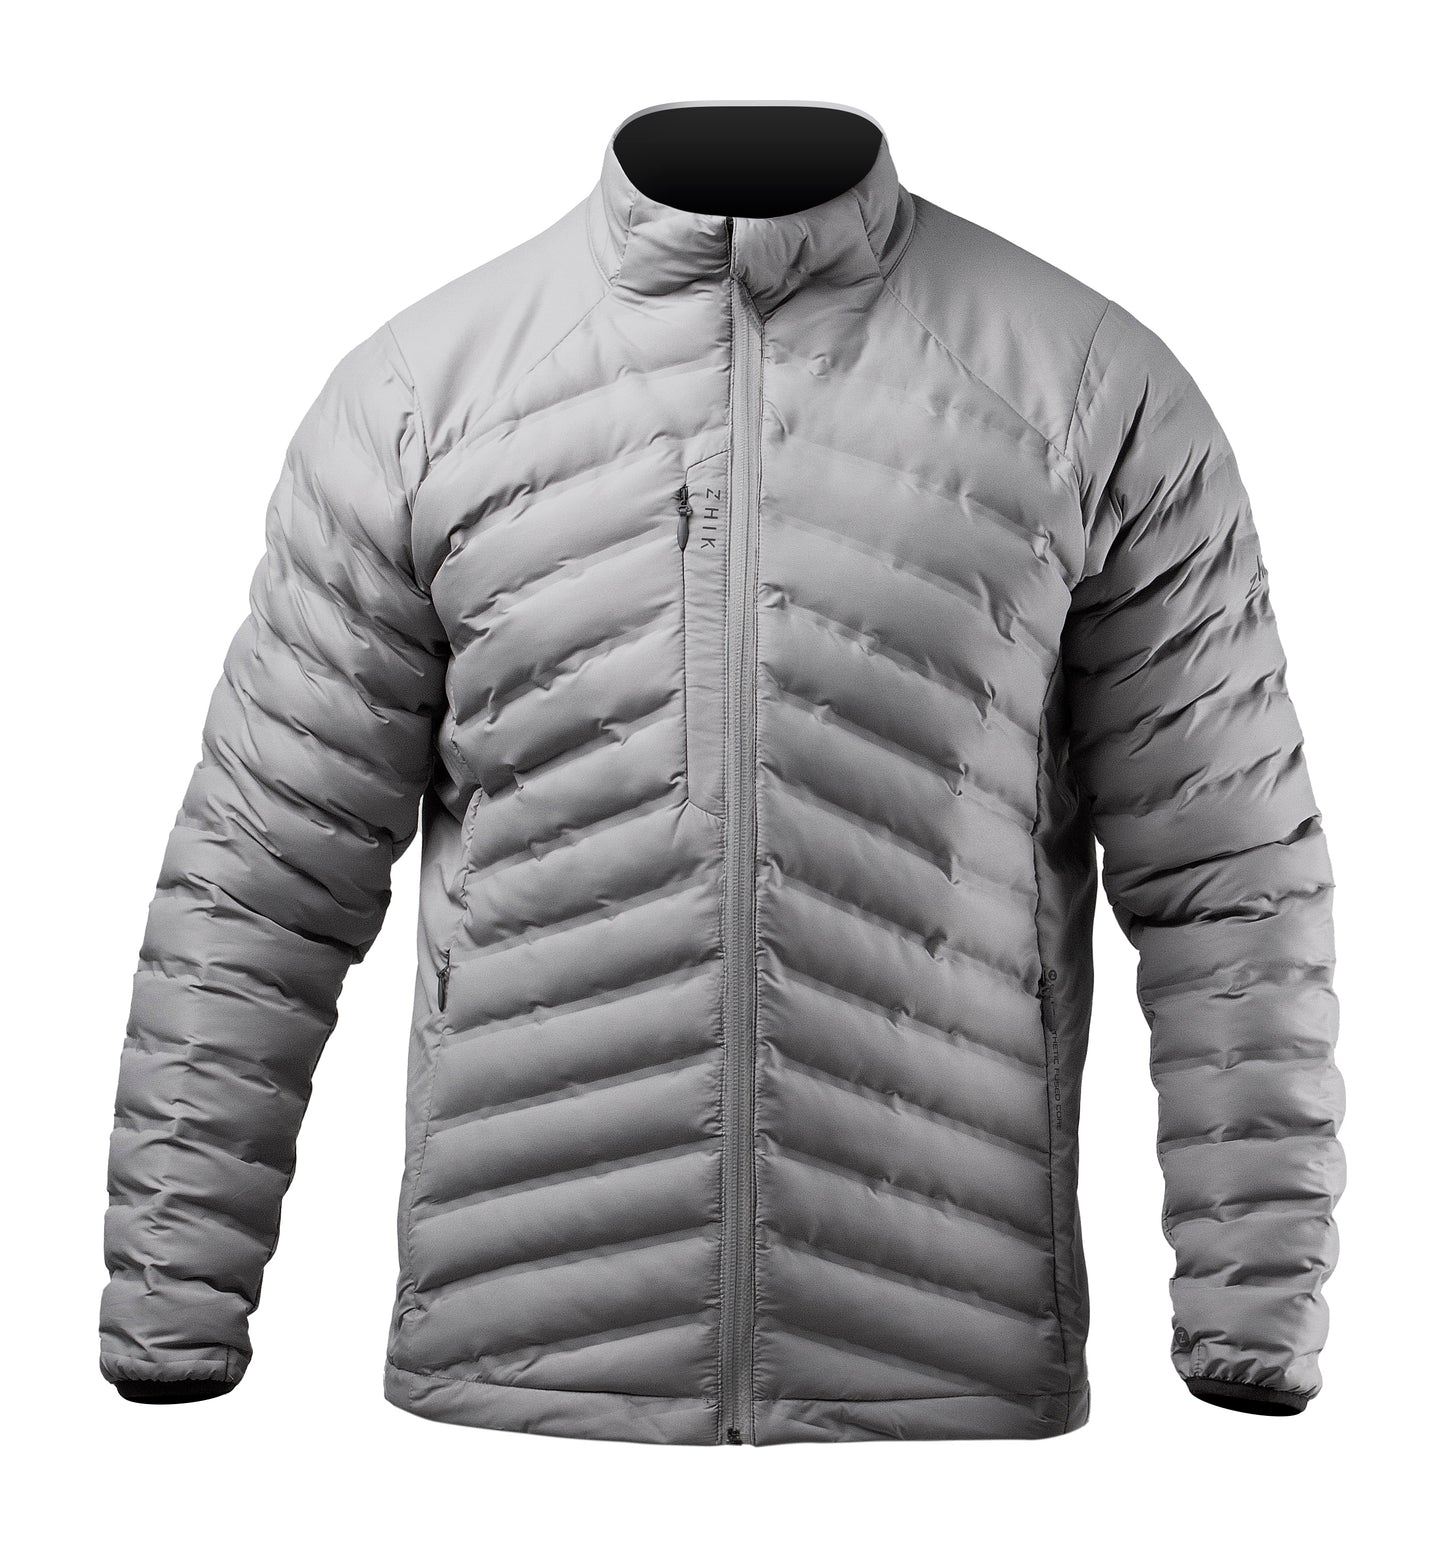 ZHIK Mens Cell Insulated Jacket